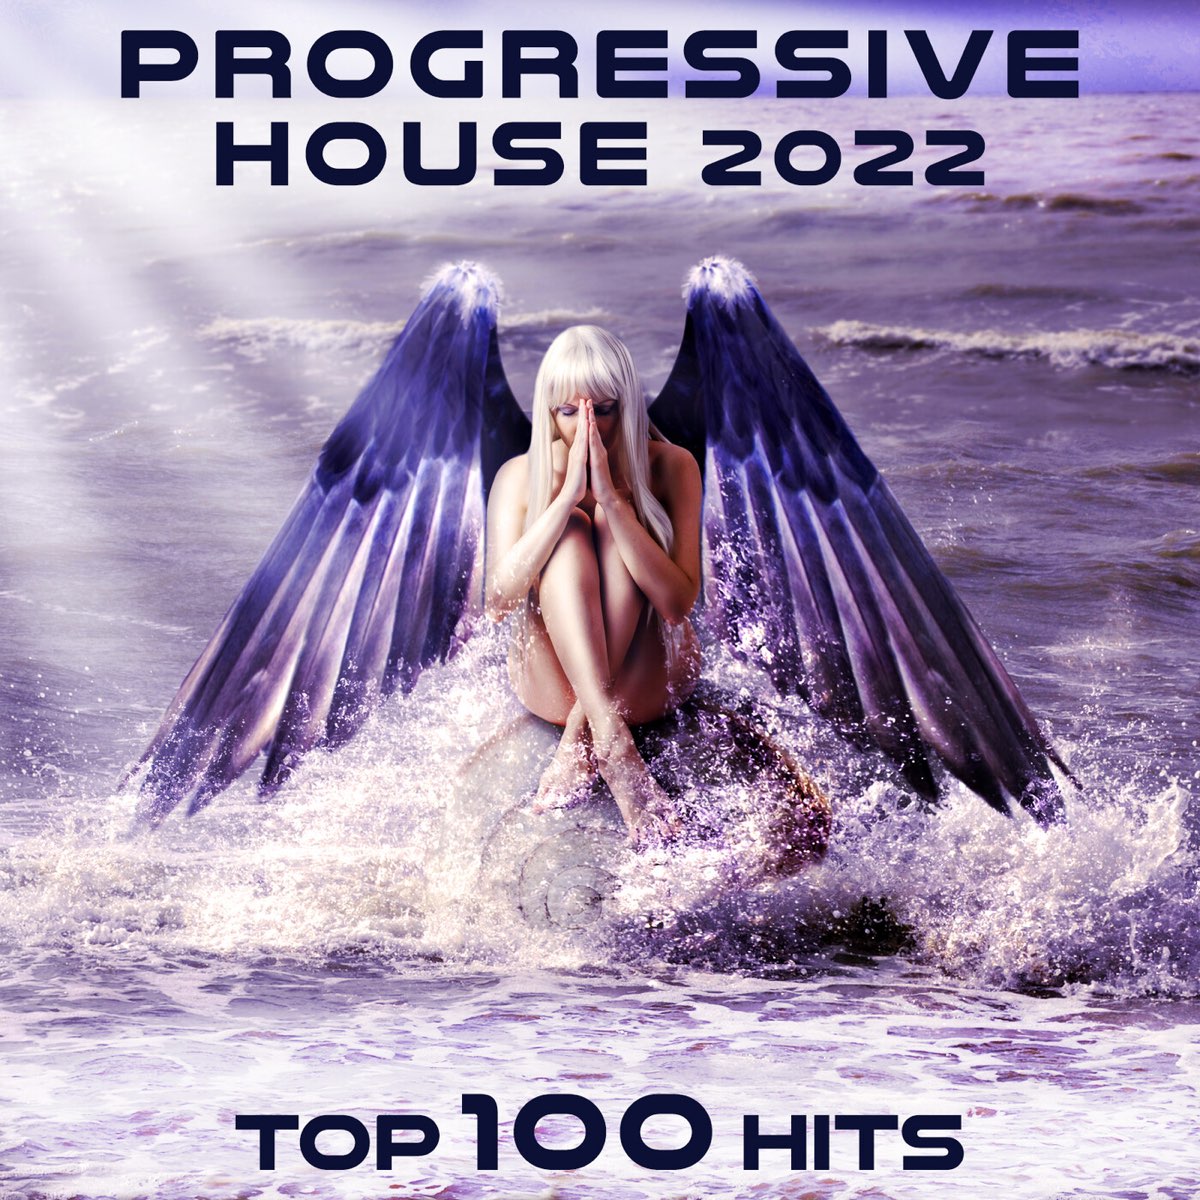 Progressive House 2022 Top 100 Hits by DoctorSpook on Apple Music